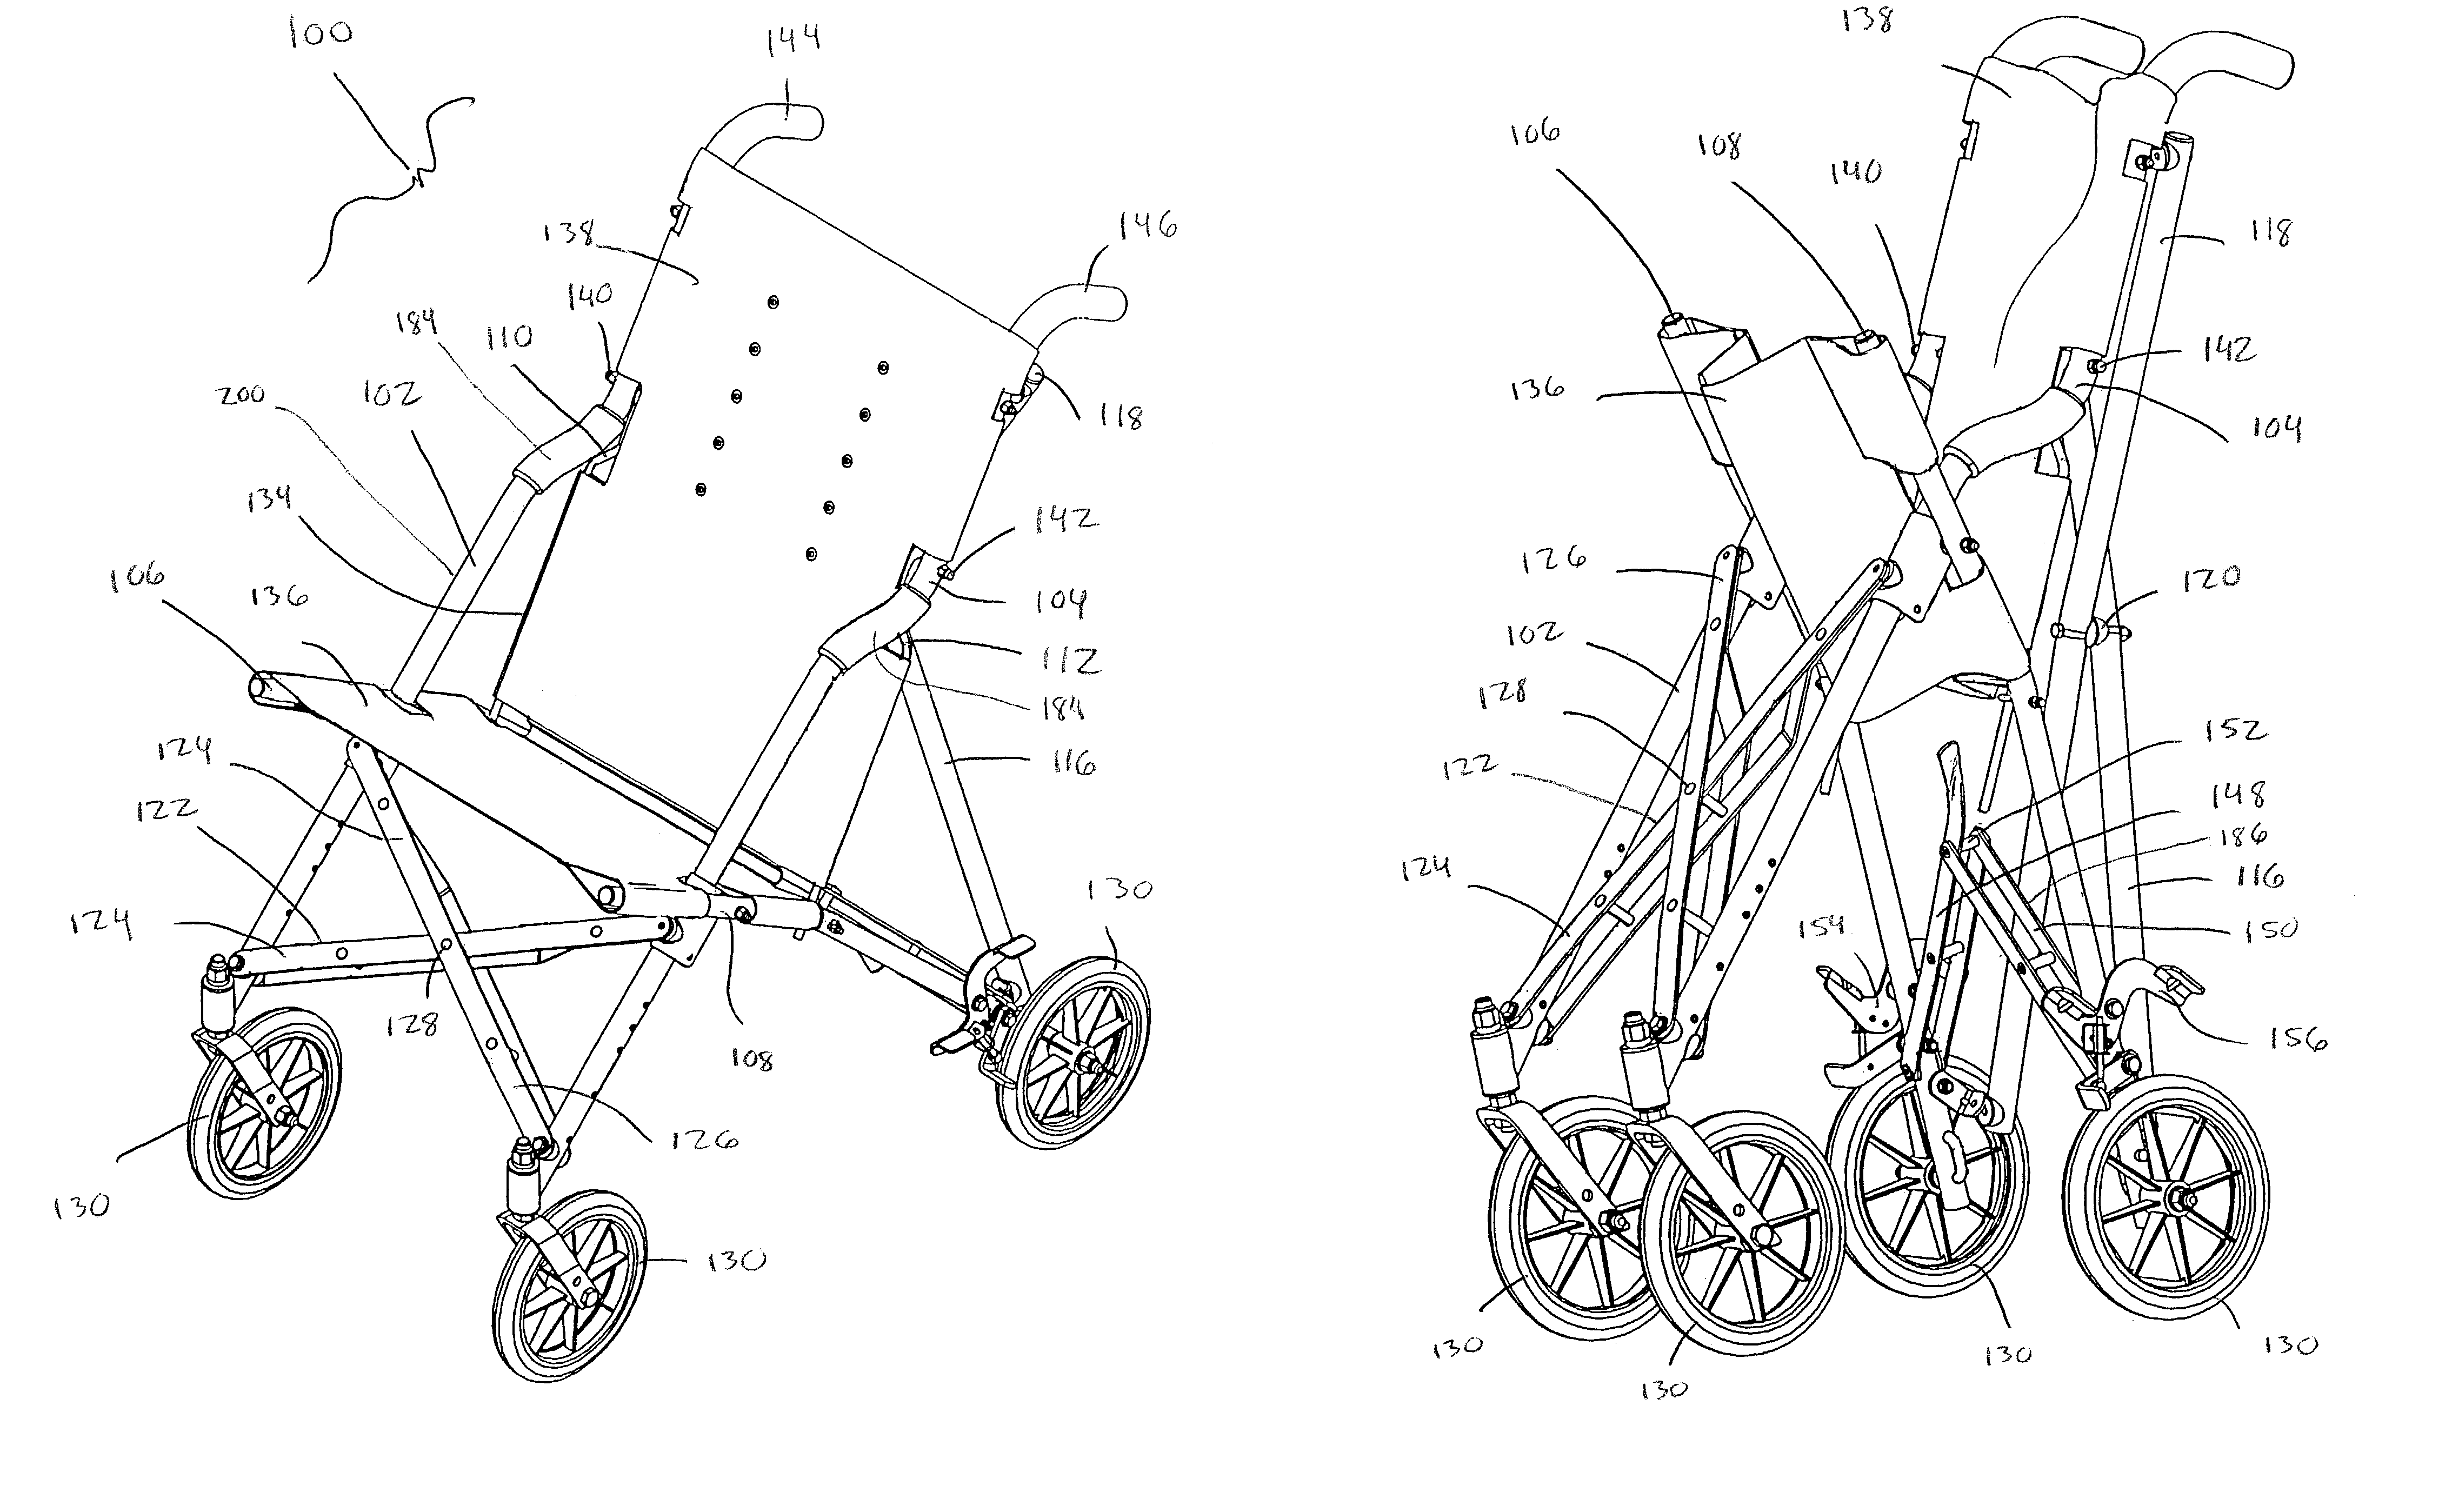 Folding seat support structure